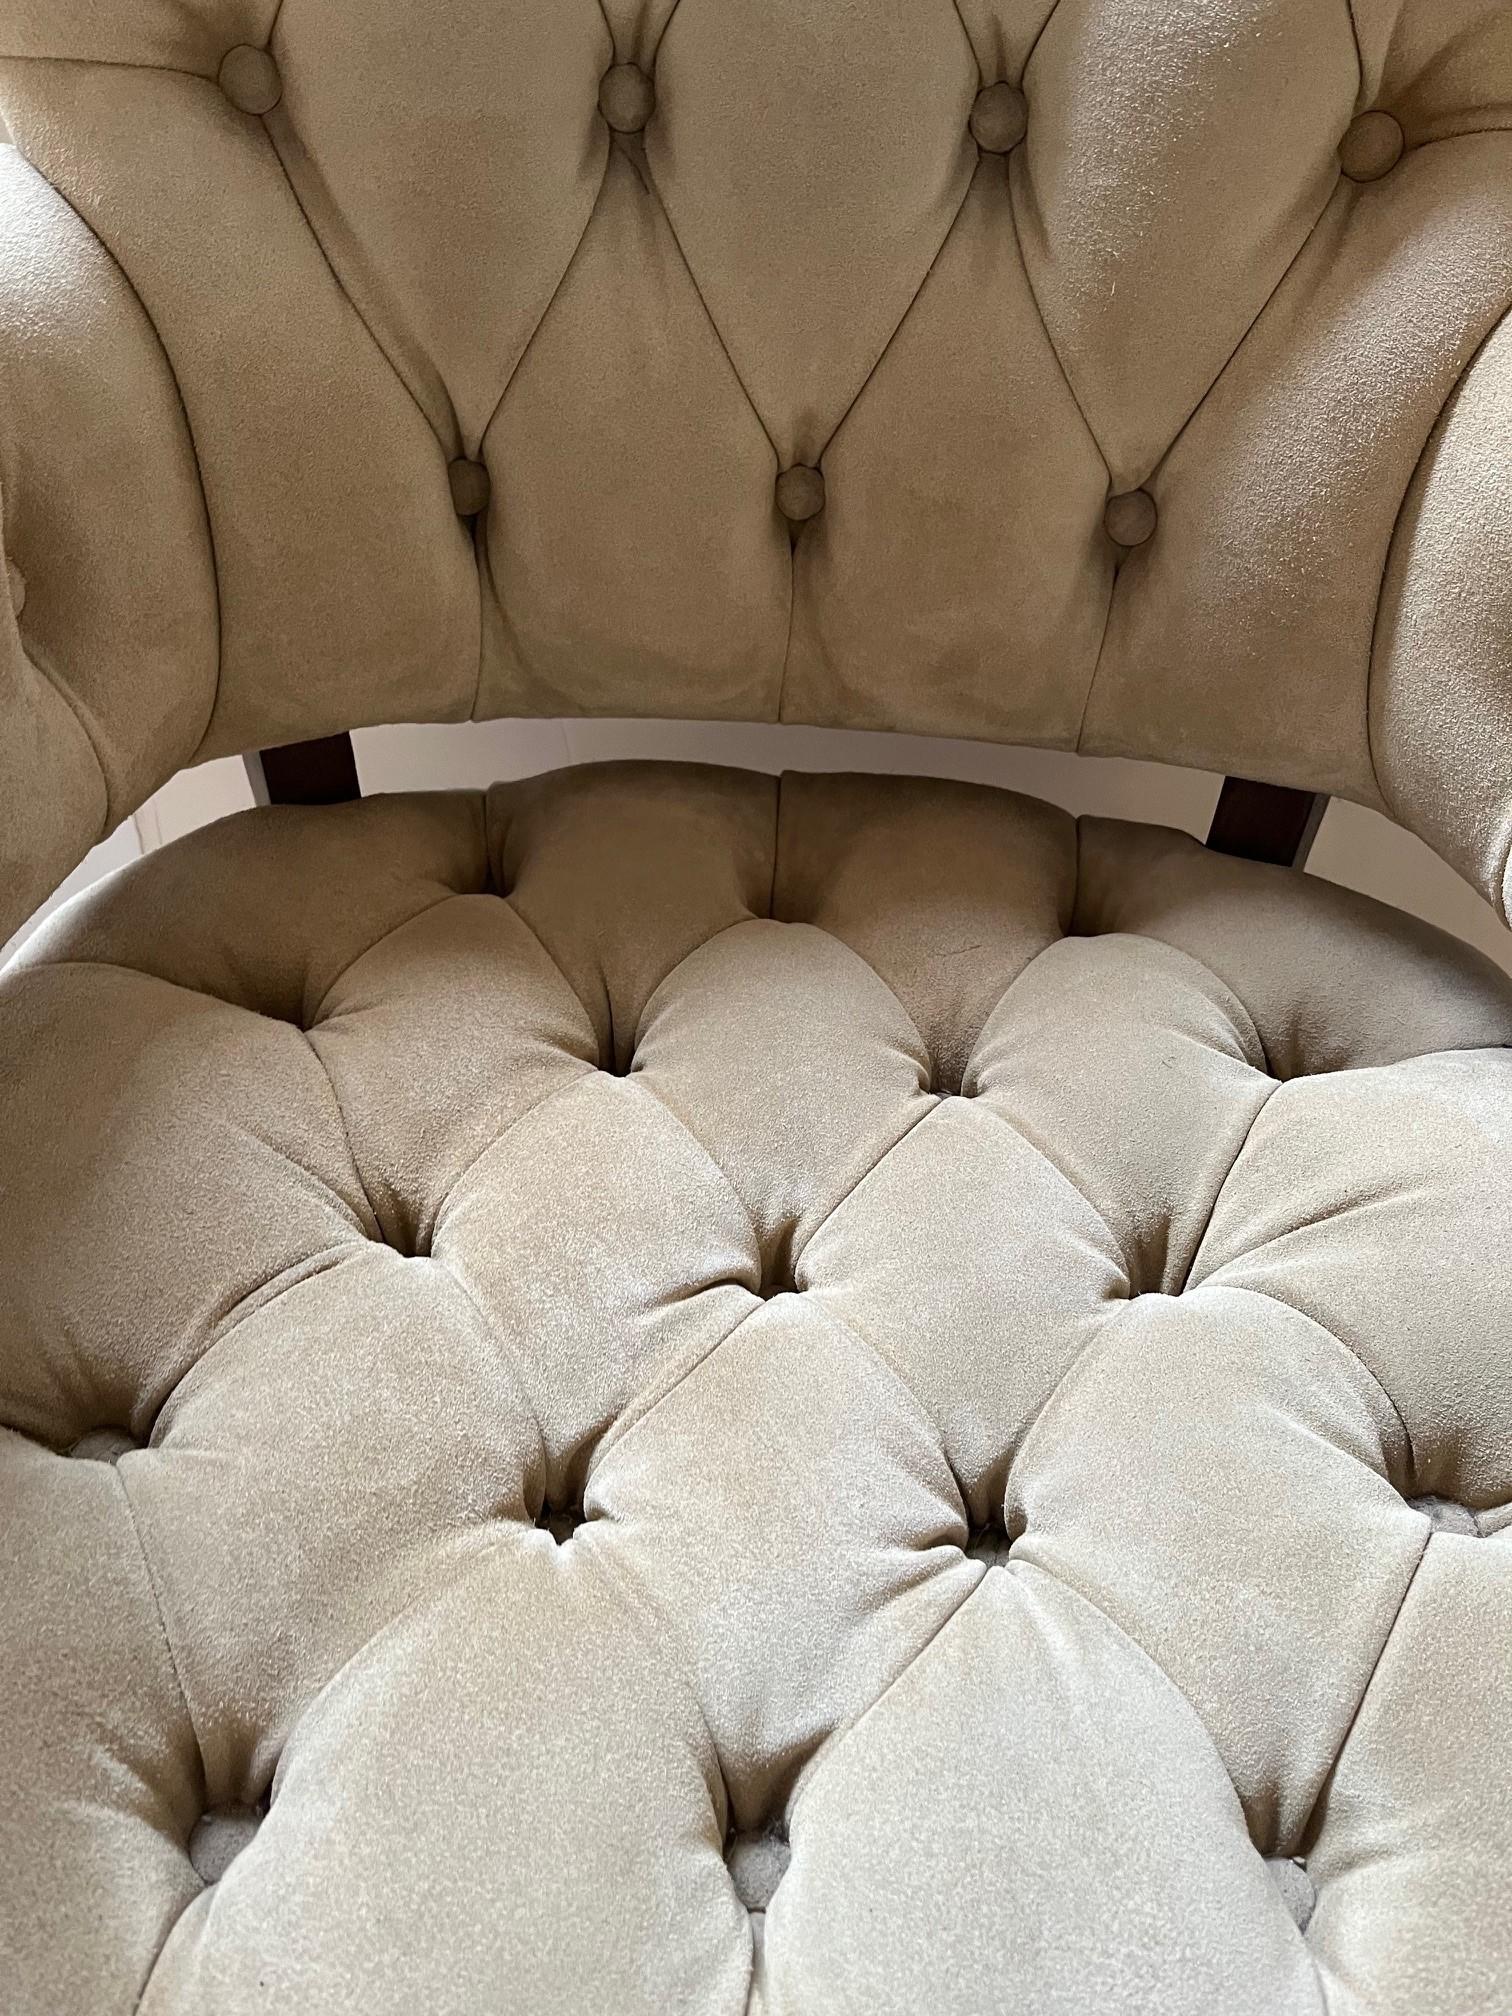 Brass Made to Order Elegant Tufted Seat and Back in Beige Suede Leather Seville Chair For Sale